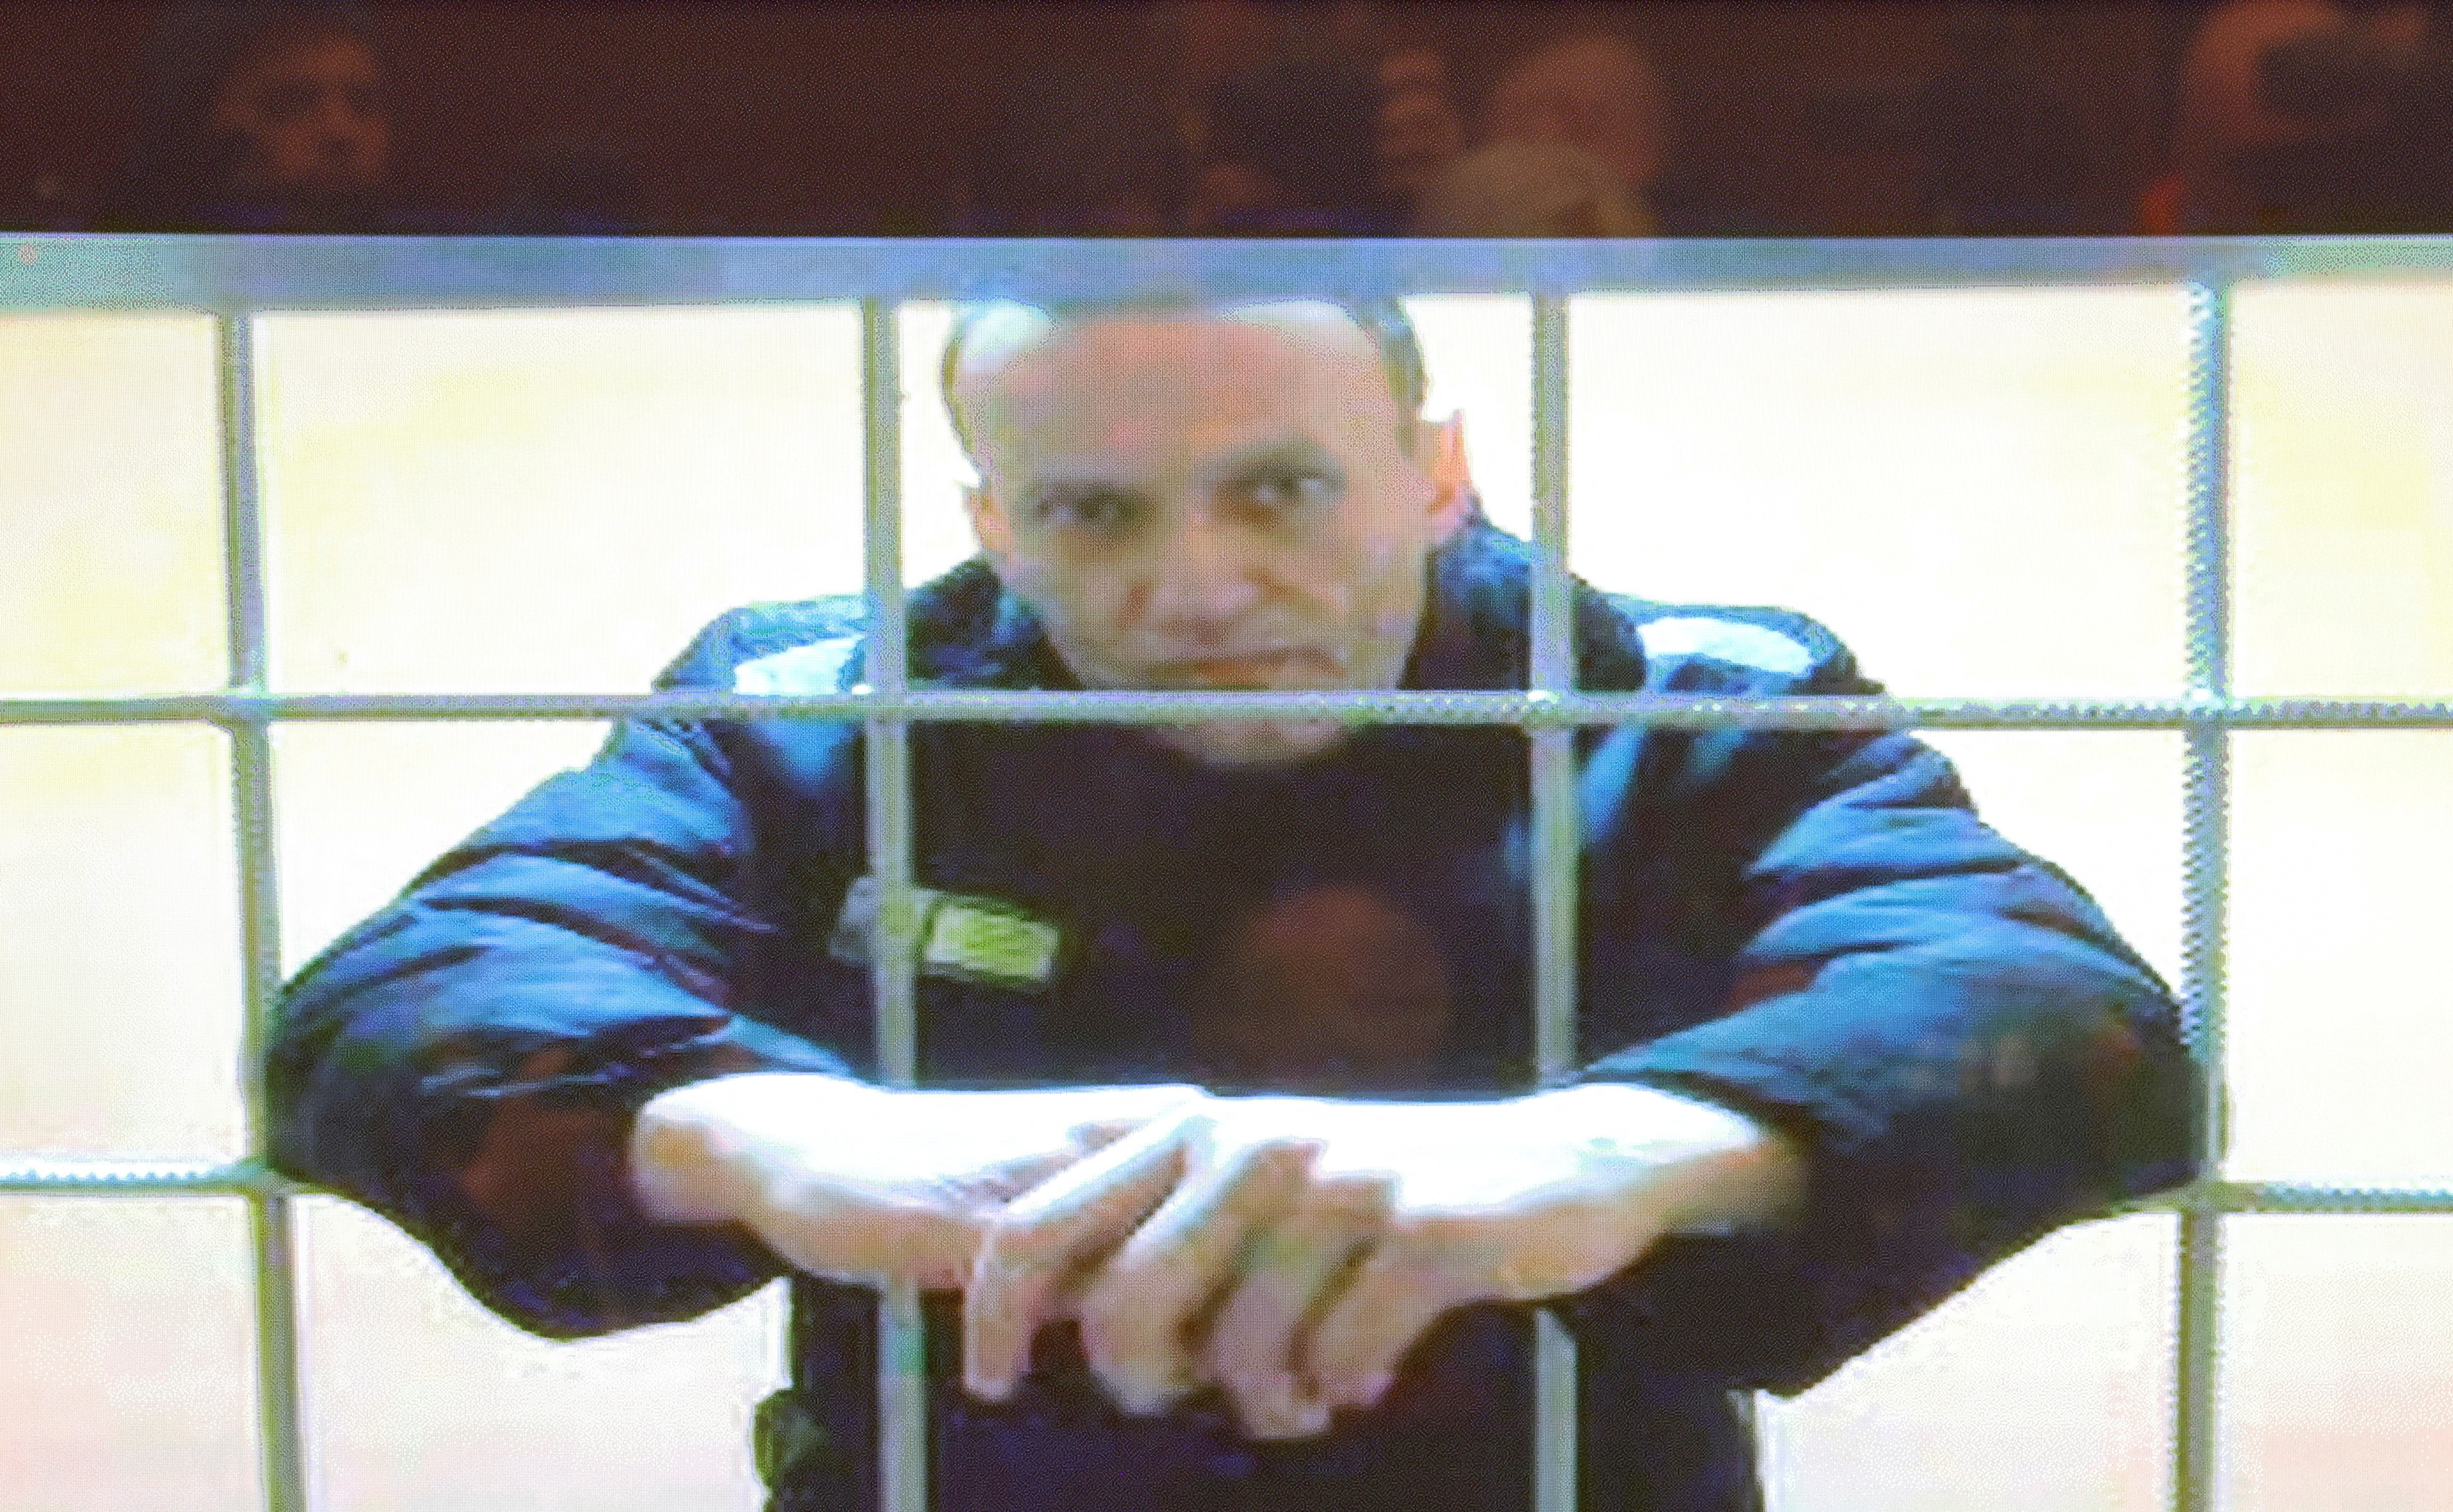 Jailed Russian opposition leader Alexei Navalny is seen on a screen during a court hearing in Moscow